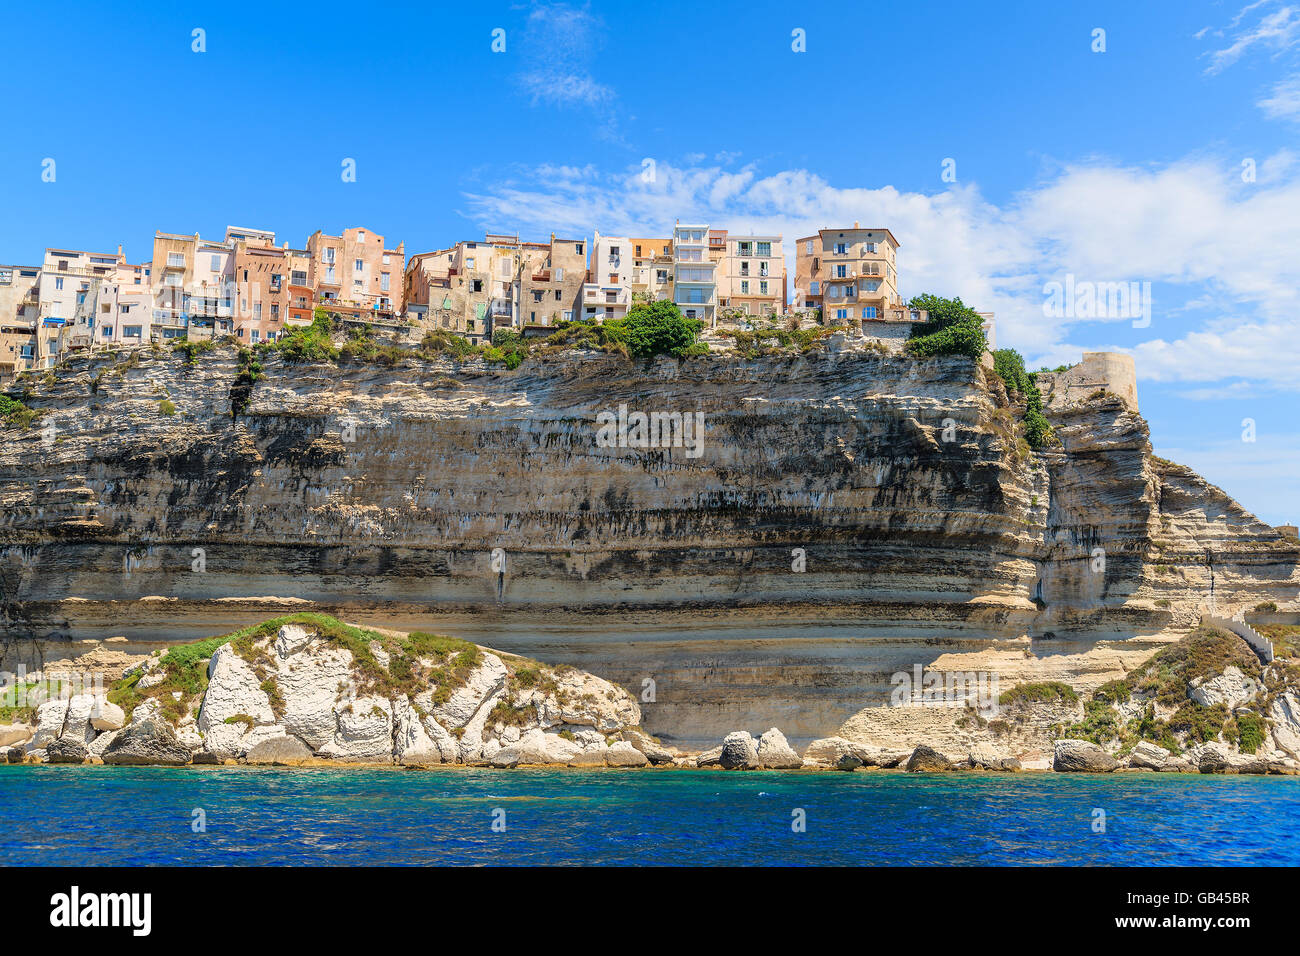 Colourful houses of Bonifacio old town built on top of a cliff, Corsica island, France Stock Photo